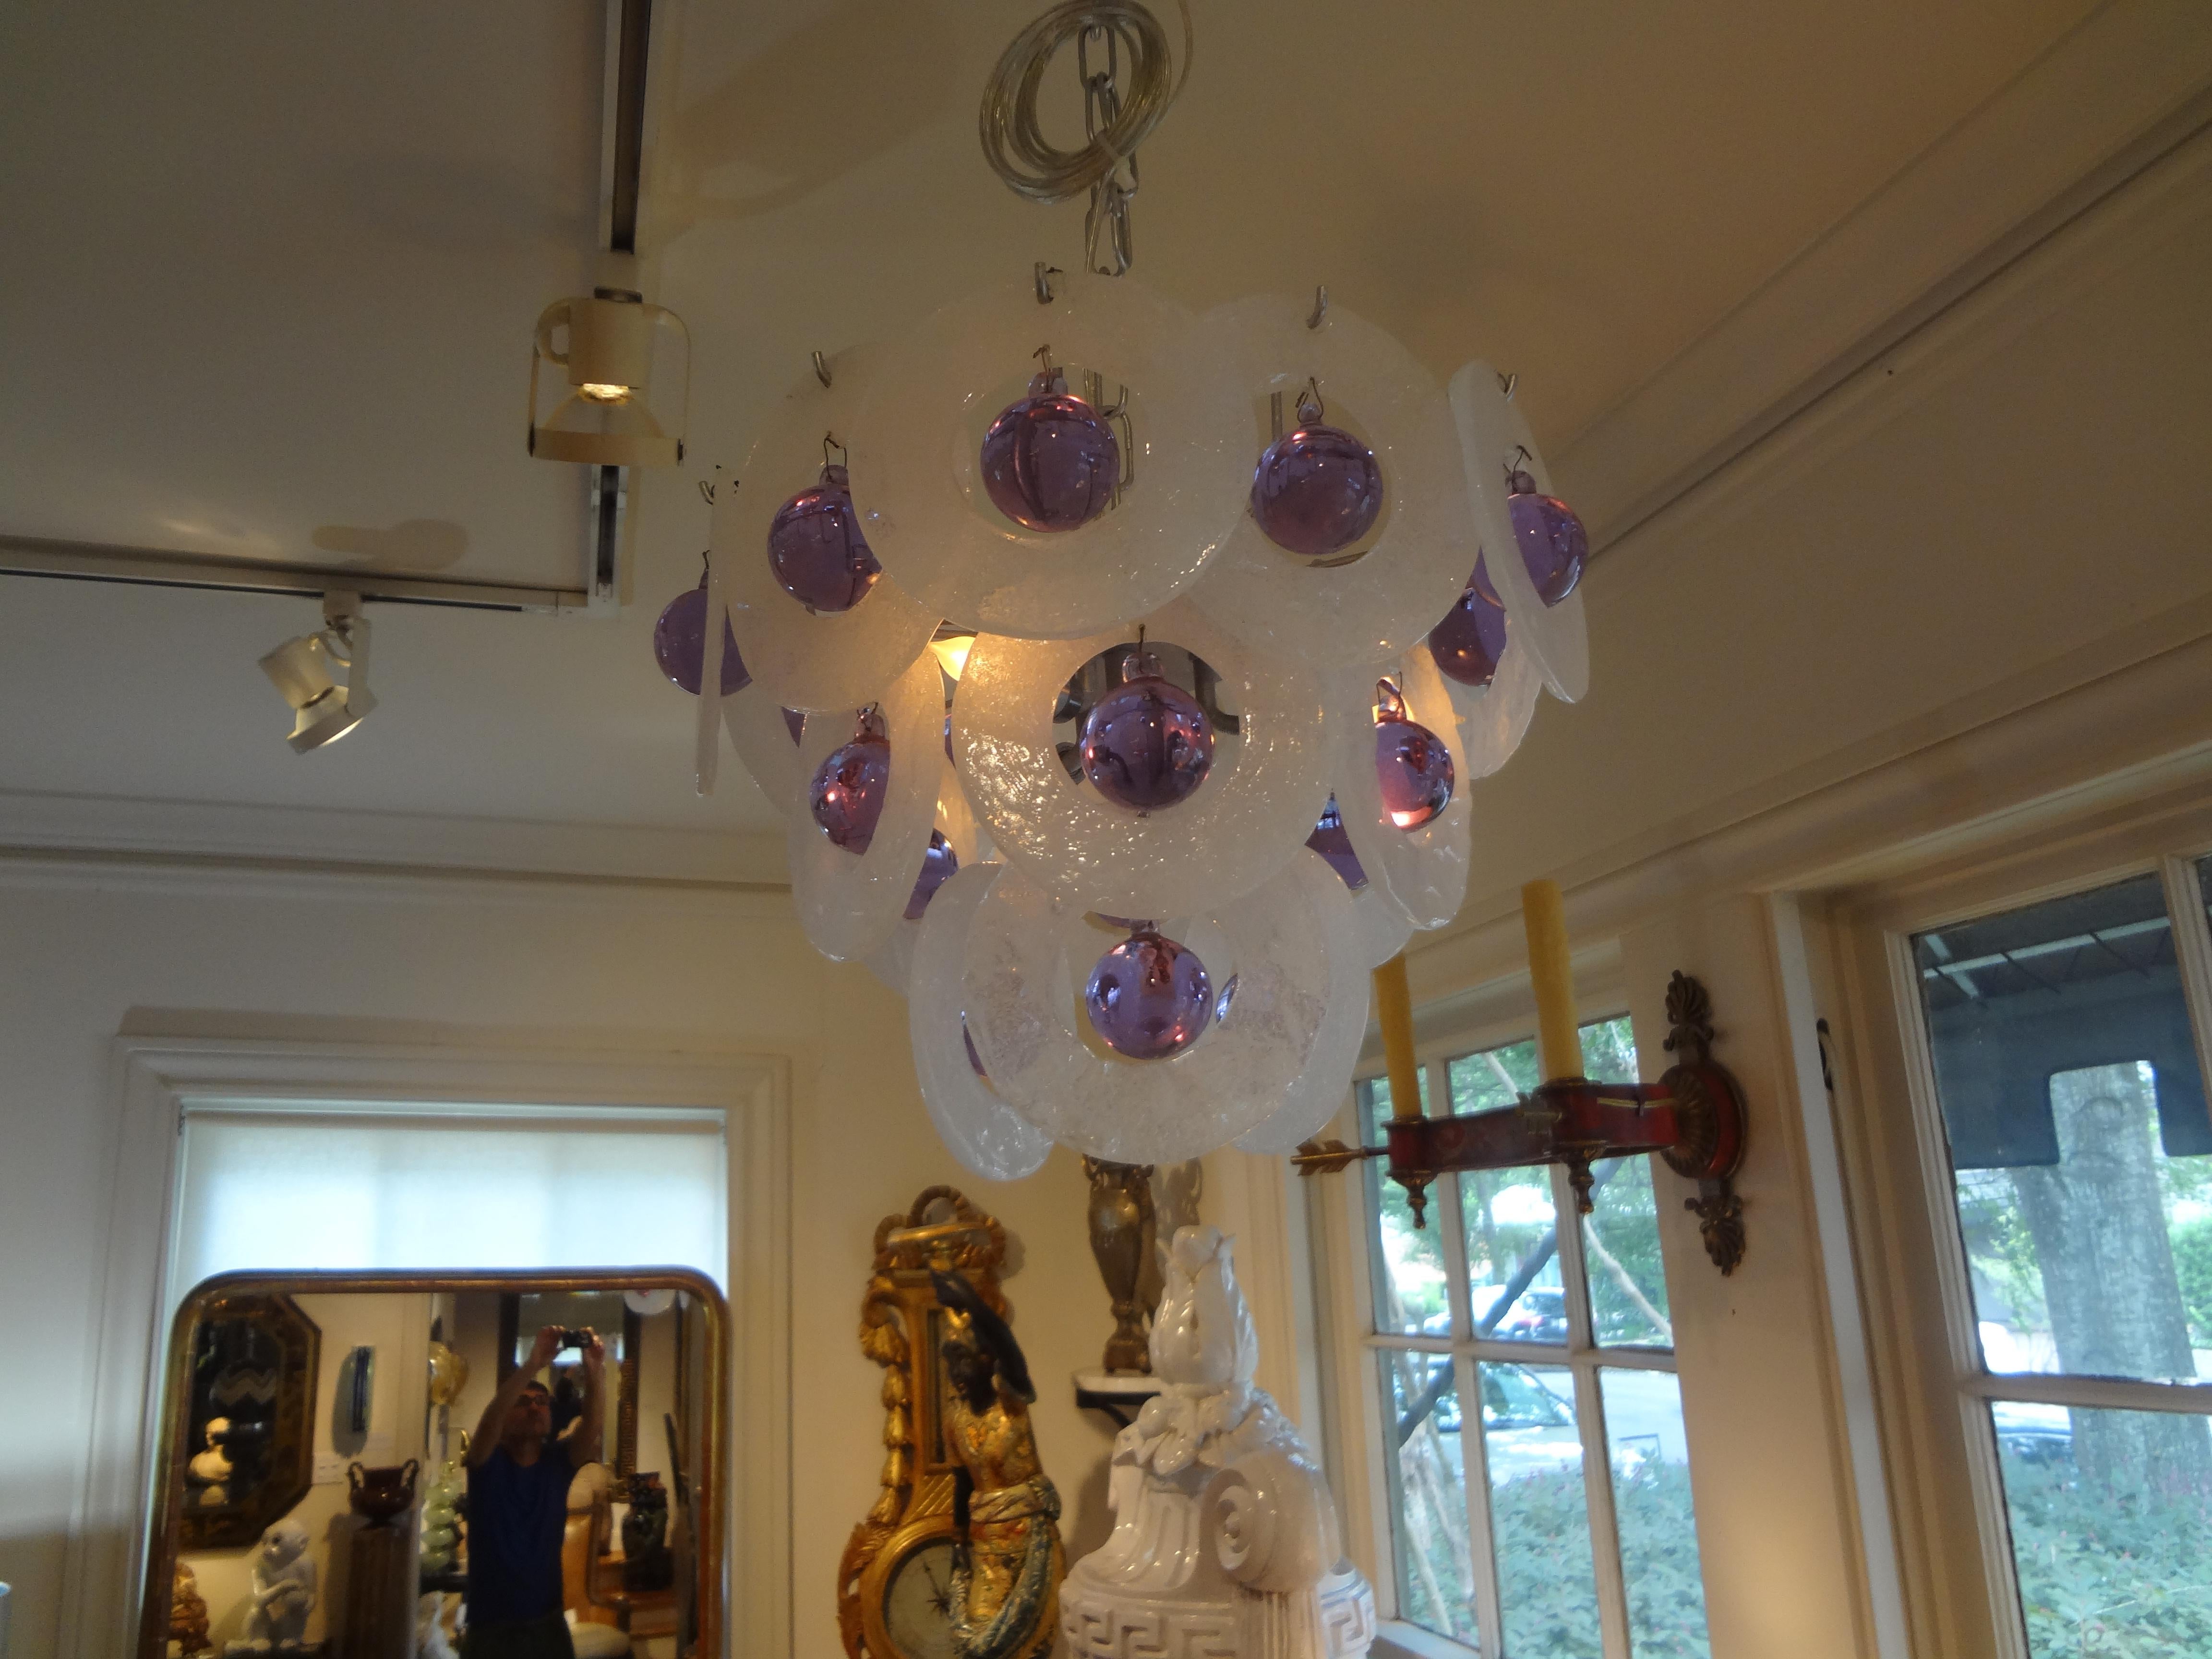 A rare midcentury Venini style Murano glass pendant chandelier possibly by Toni Zuccheri featuring multiple white glass open discs with purple spheres hanging from each. This highly unusual Murano glass chandelier or lantern has been newly wired for